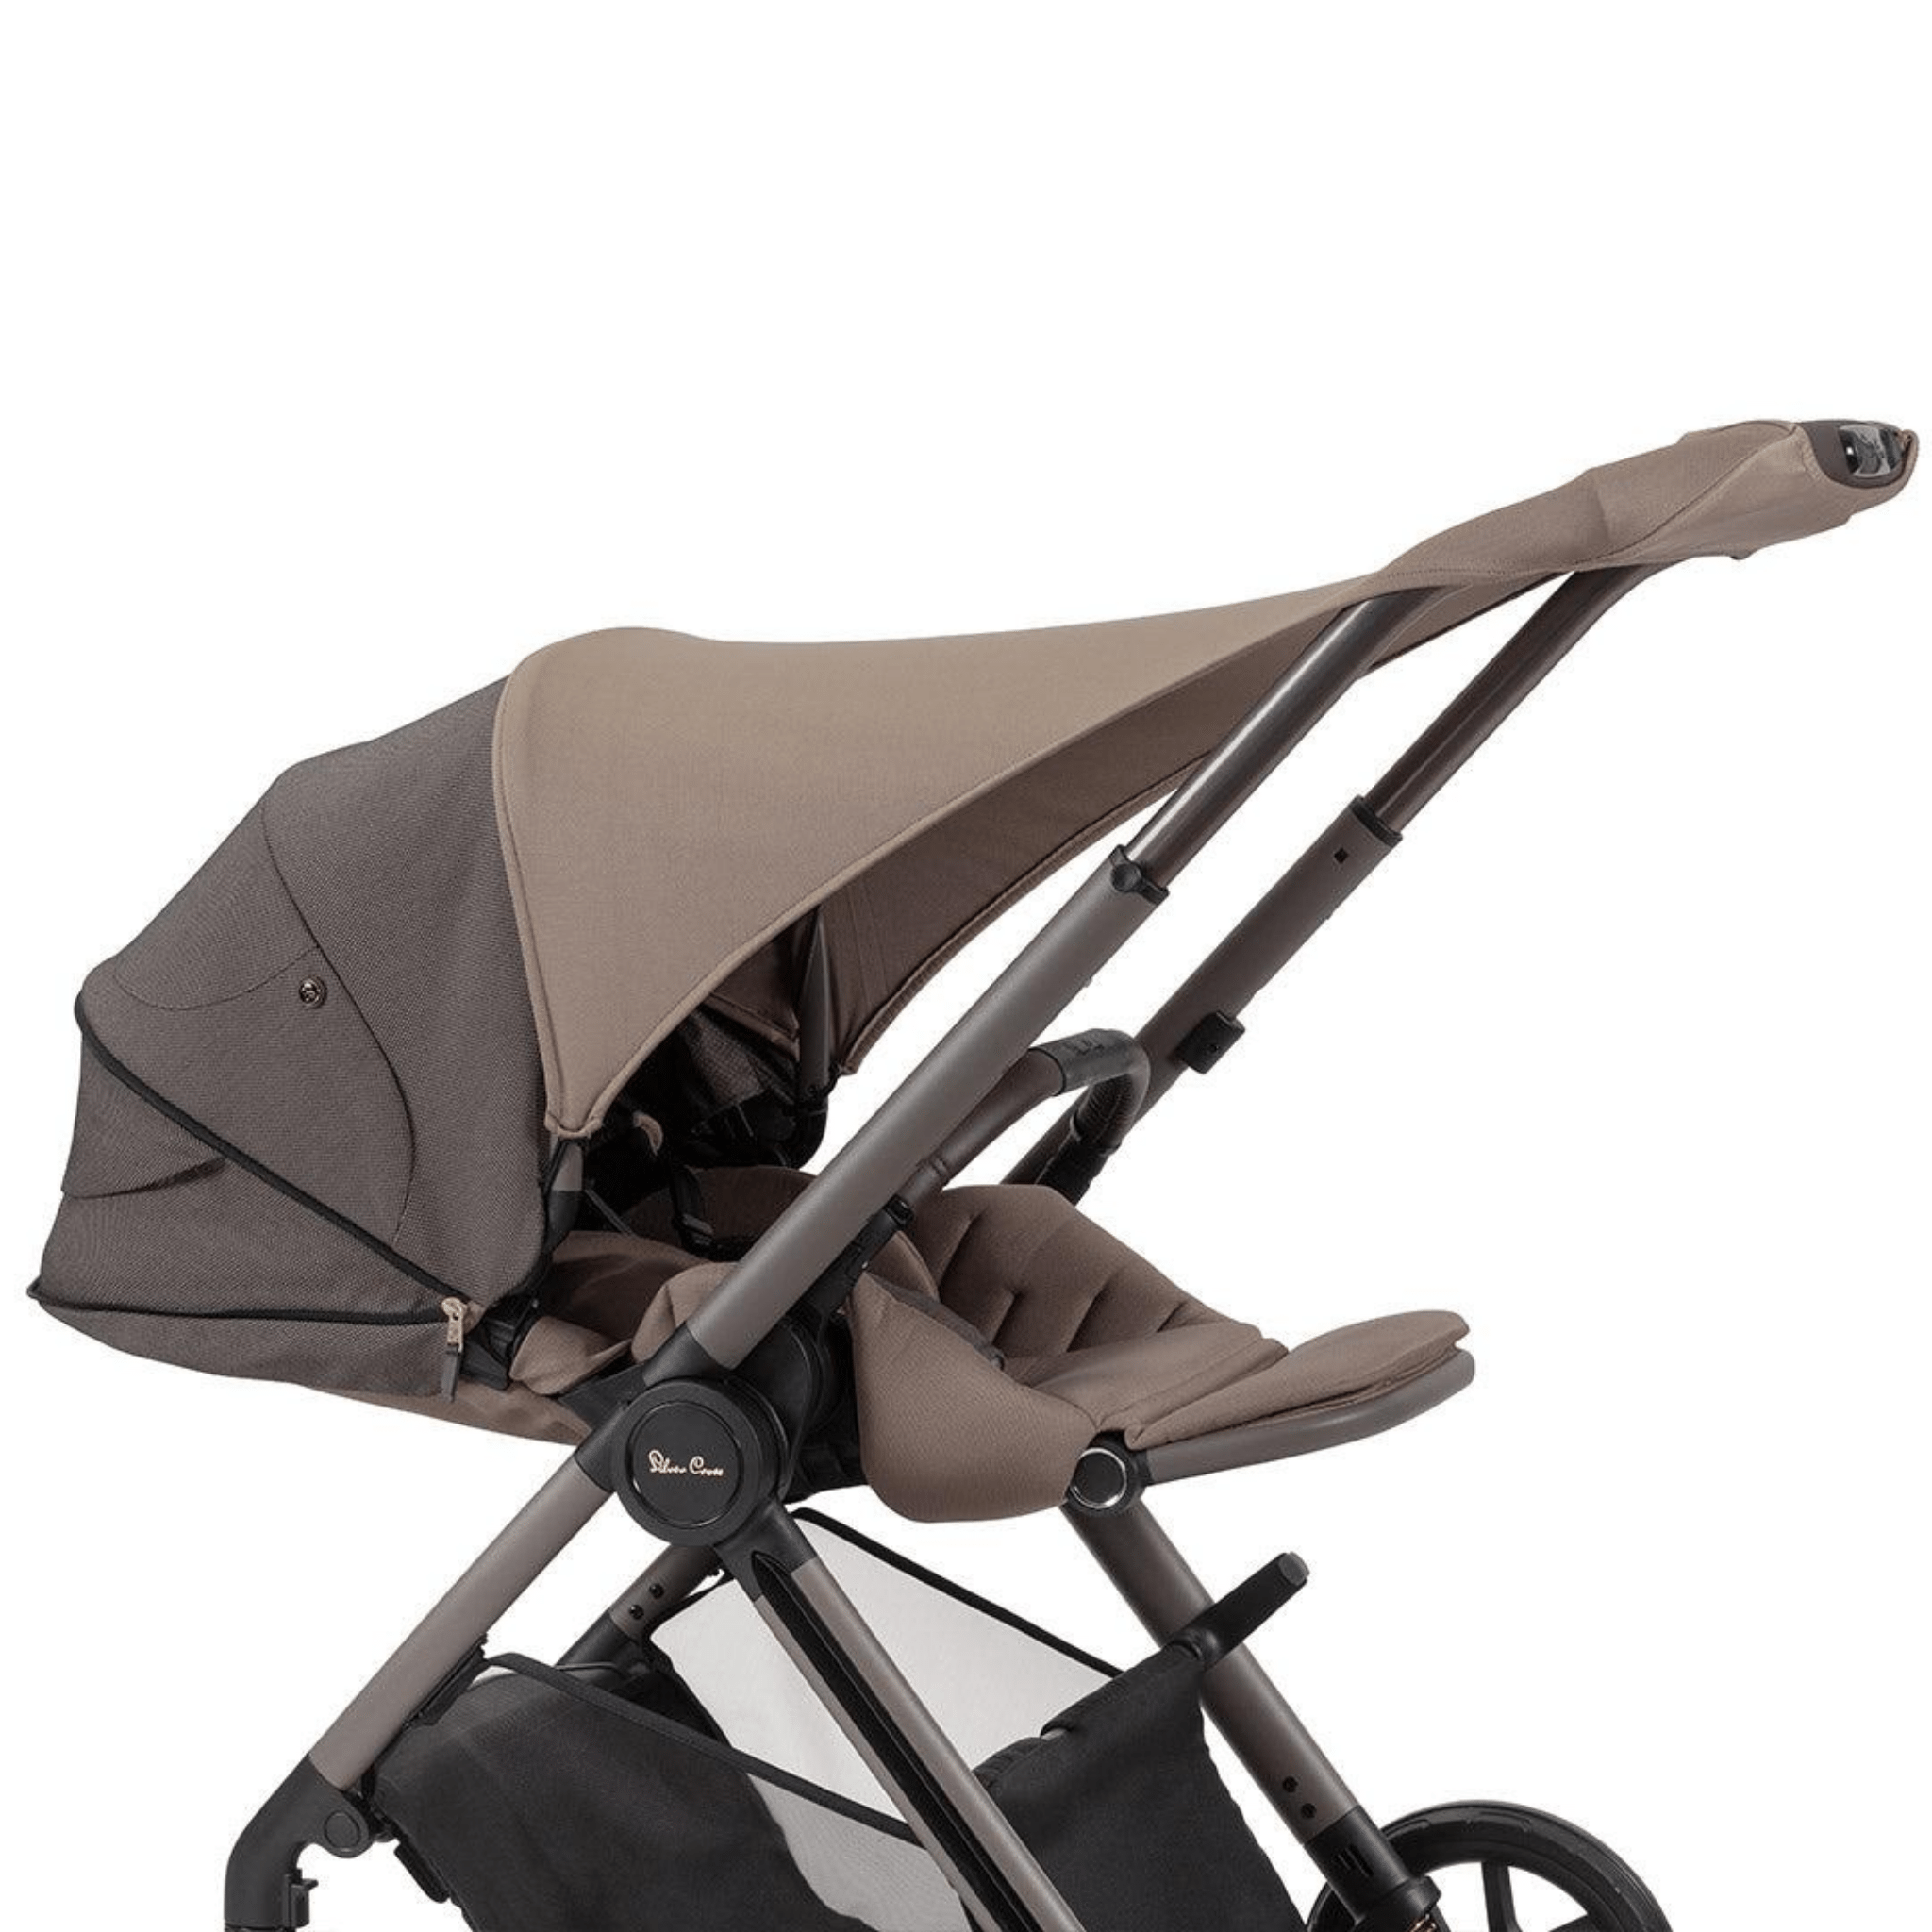 Silver Cross Reef Travel System with Newborn Pod in Earth Travel Systems KTRT.EA2